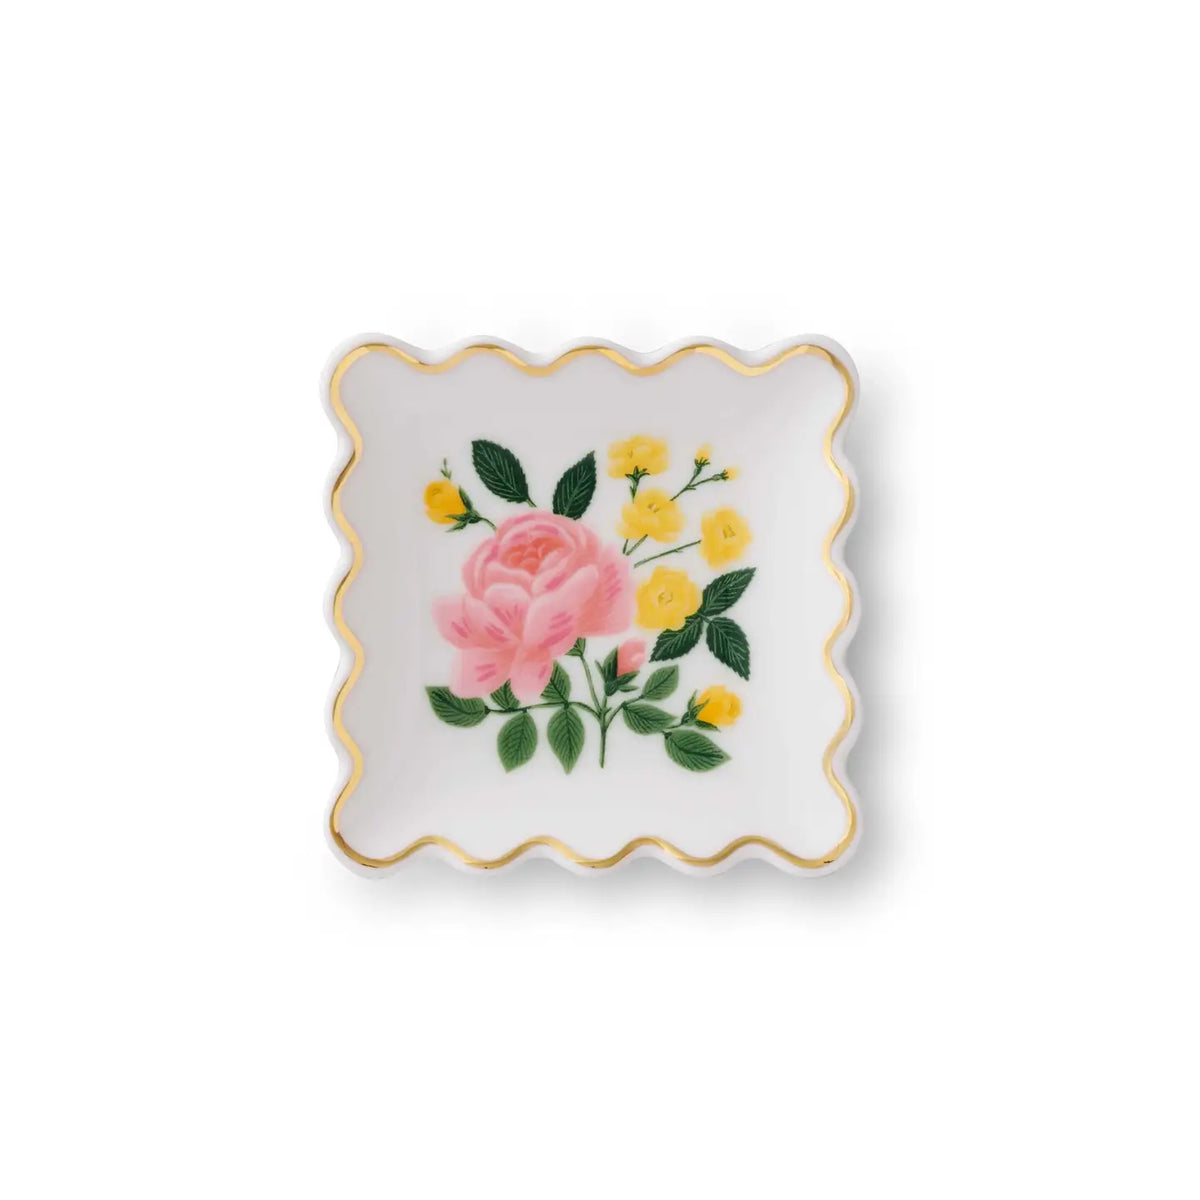 Roses Scalloped Ring Dish - The Preppy Bunny